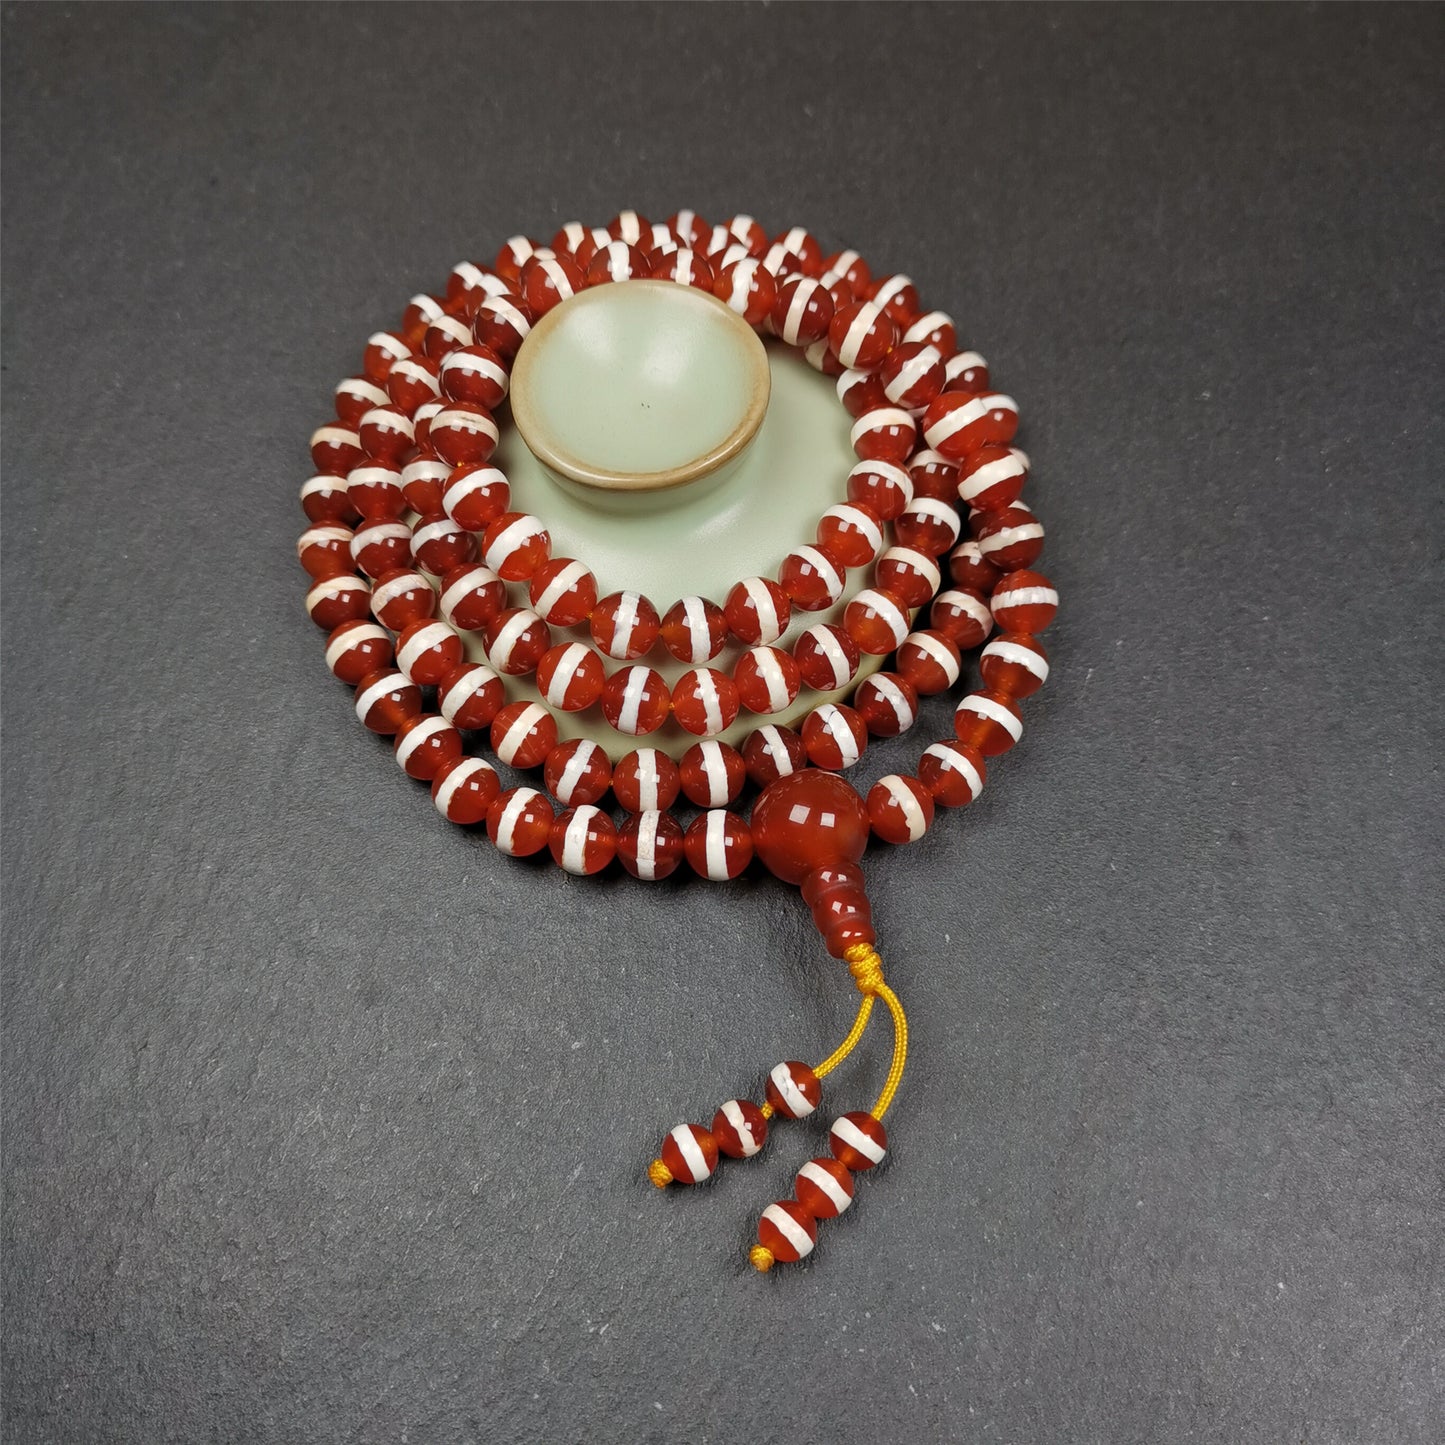 This Red Agate Medicine Buddha Bhaisajyaguru Beads Mala was handmade from tibetan crafts man in Gerze County. It's composed of 108 pcs 8.5mm red agate beads,the pattern represents Medicine Buddha Bhaisajyaguru.